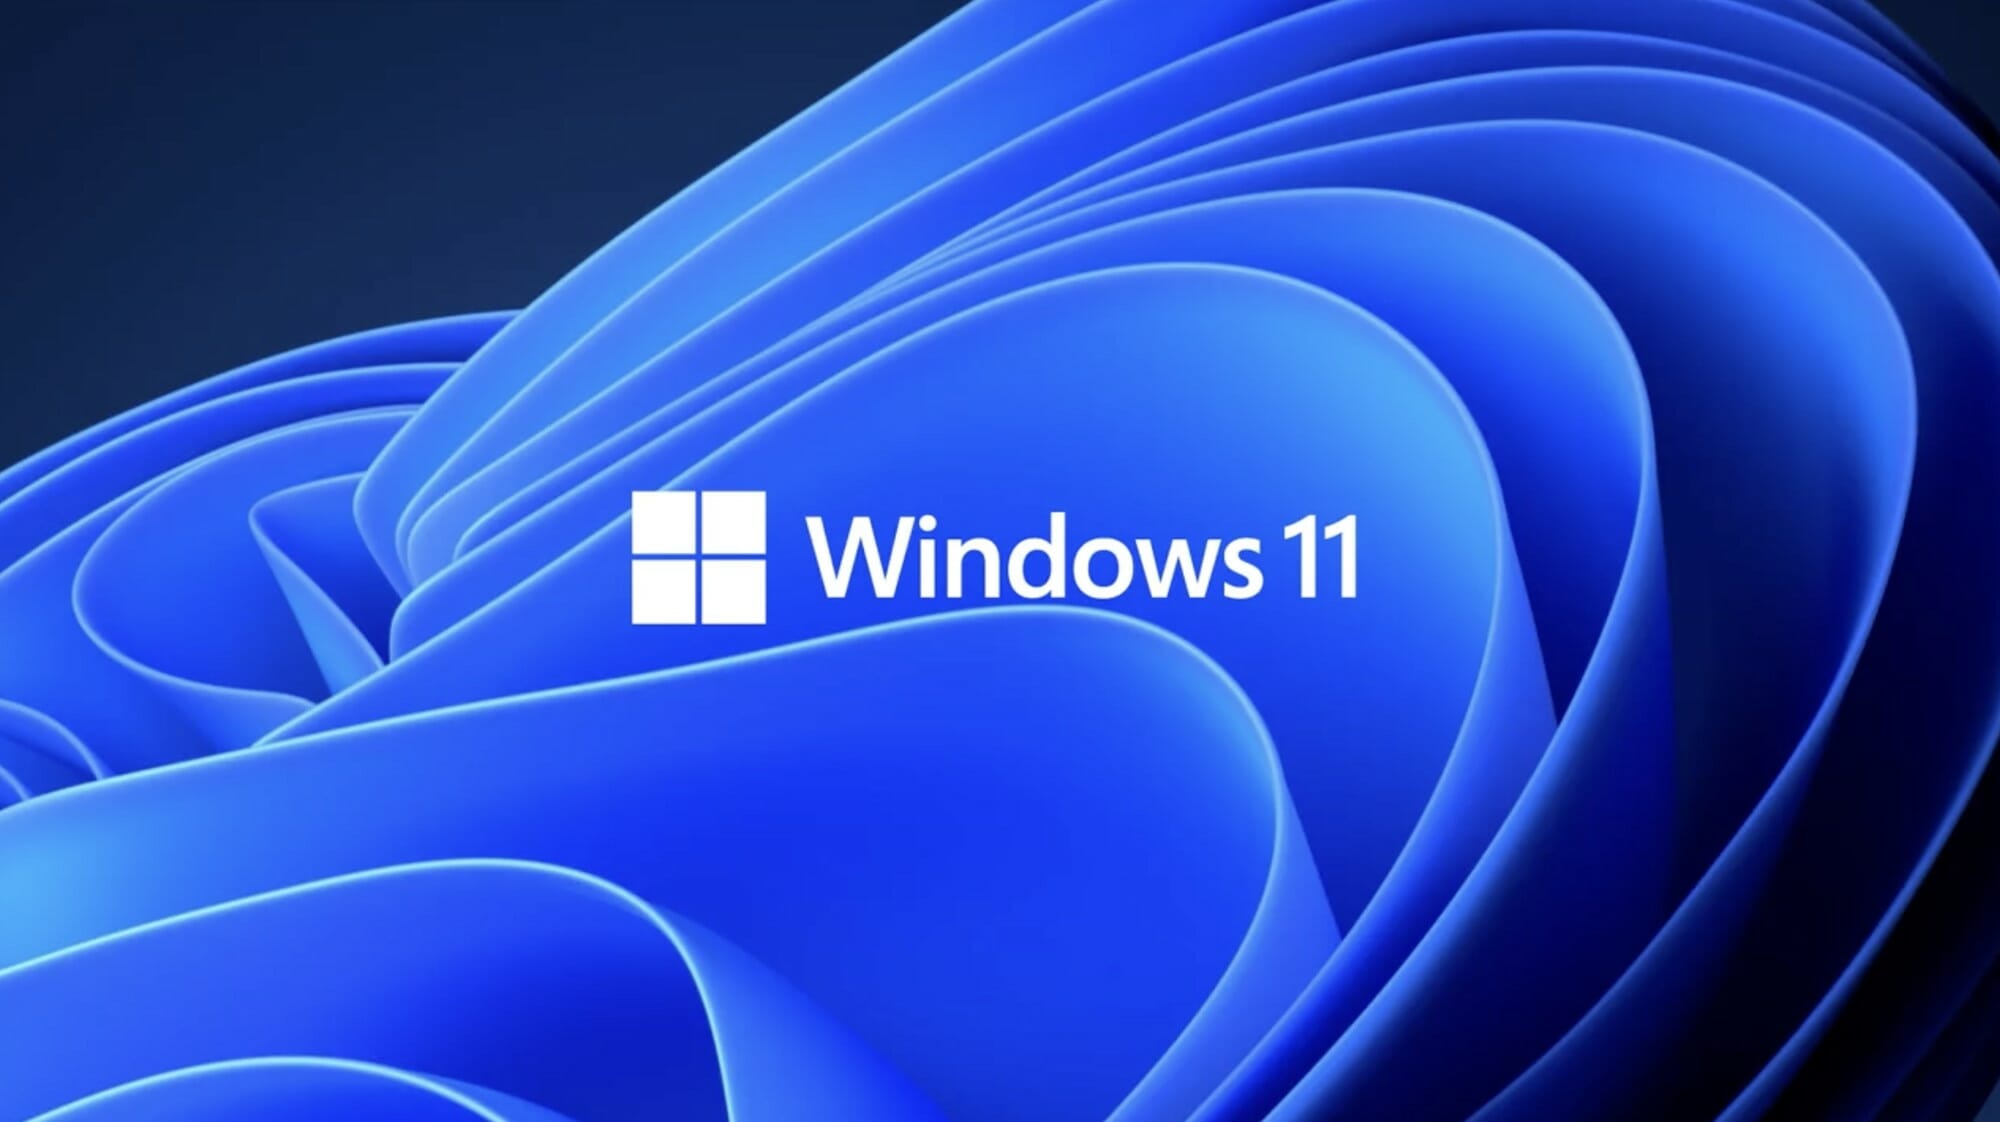 Windows 11 Wallpaper 4K : Download the leaked Windows 11 wallpapers here - Android : Windows